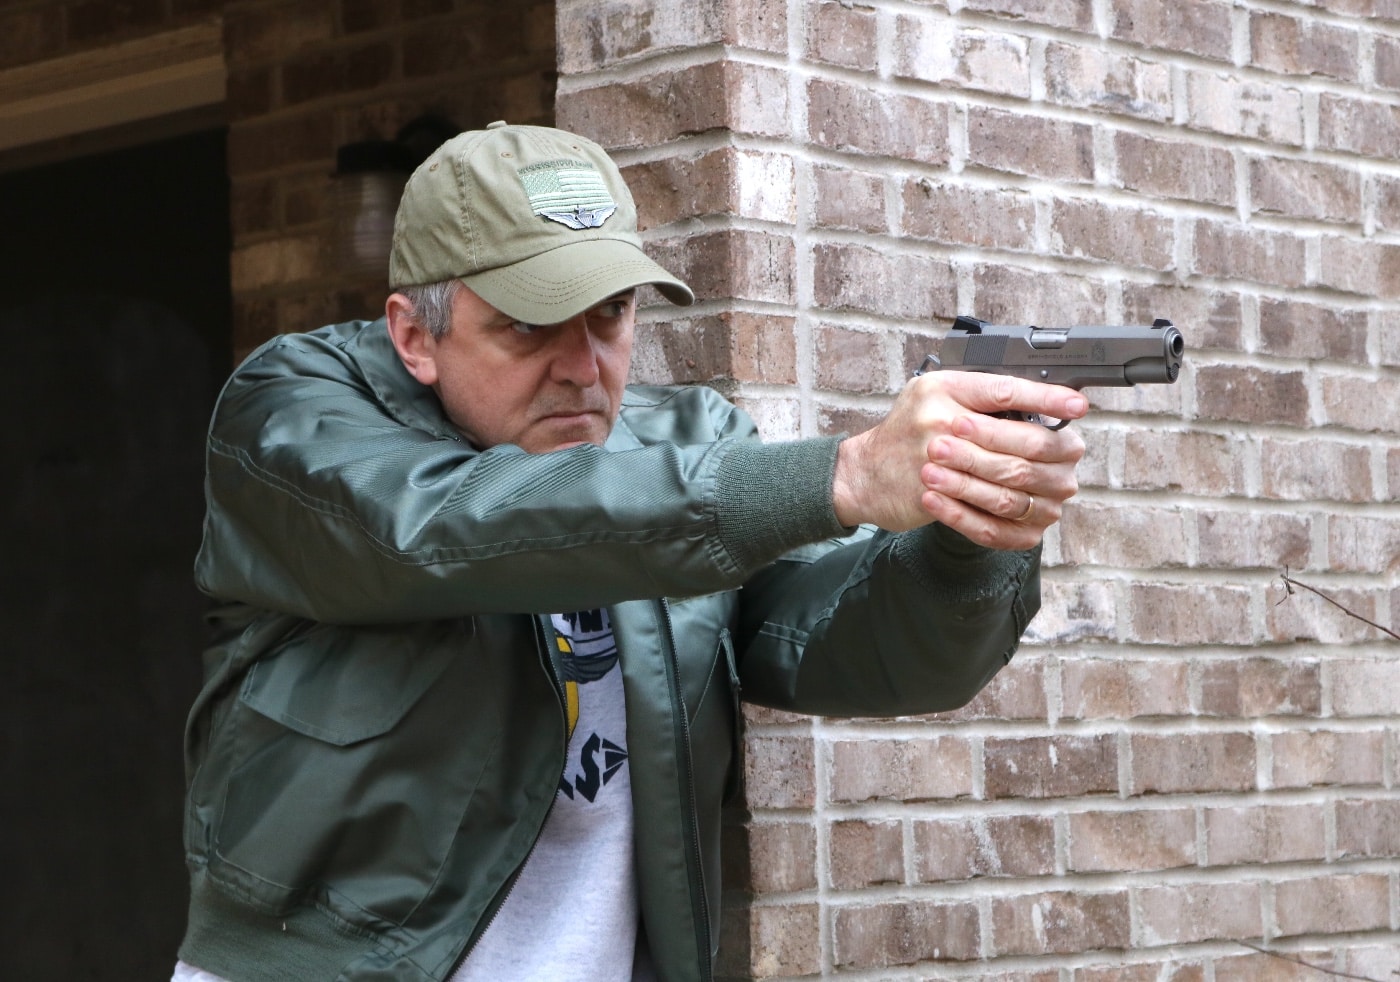 In this photograph, the author Will Dabbs MD points the Springfield Armory Garrison 4.25" 1911 pistol during a training exercise with the firearm. Guns are deadly weapons and safe training should be done under the supervision of trained professionals.